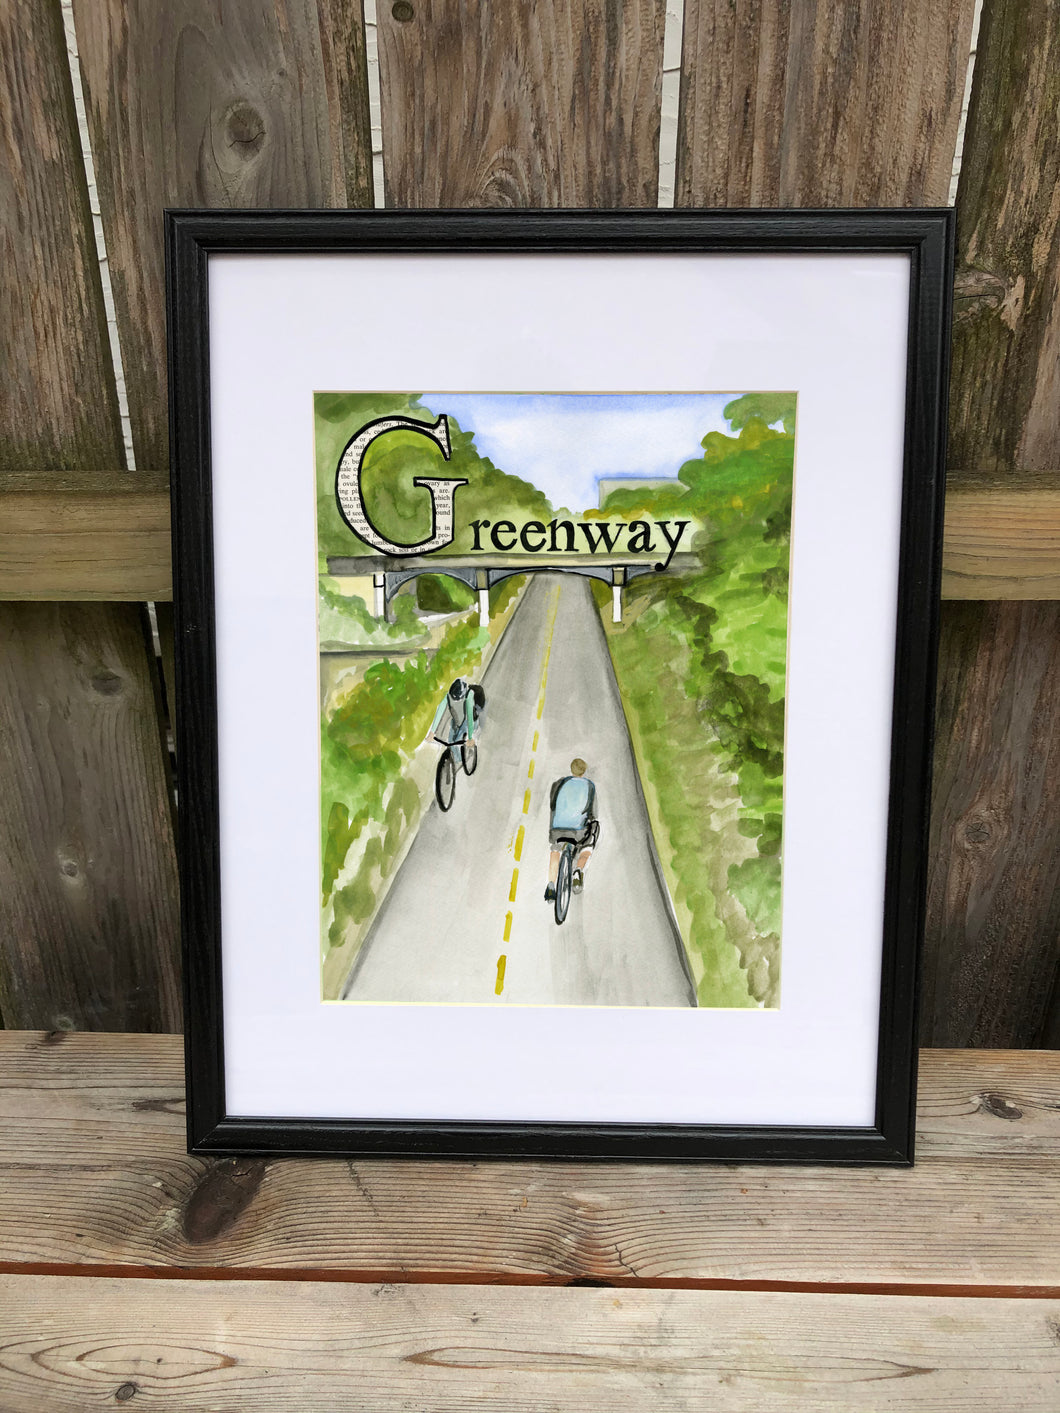 G is for Greenway - Original Framed Painting